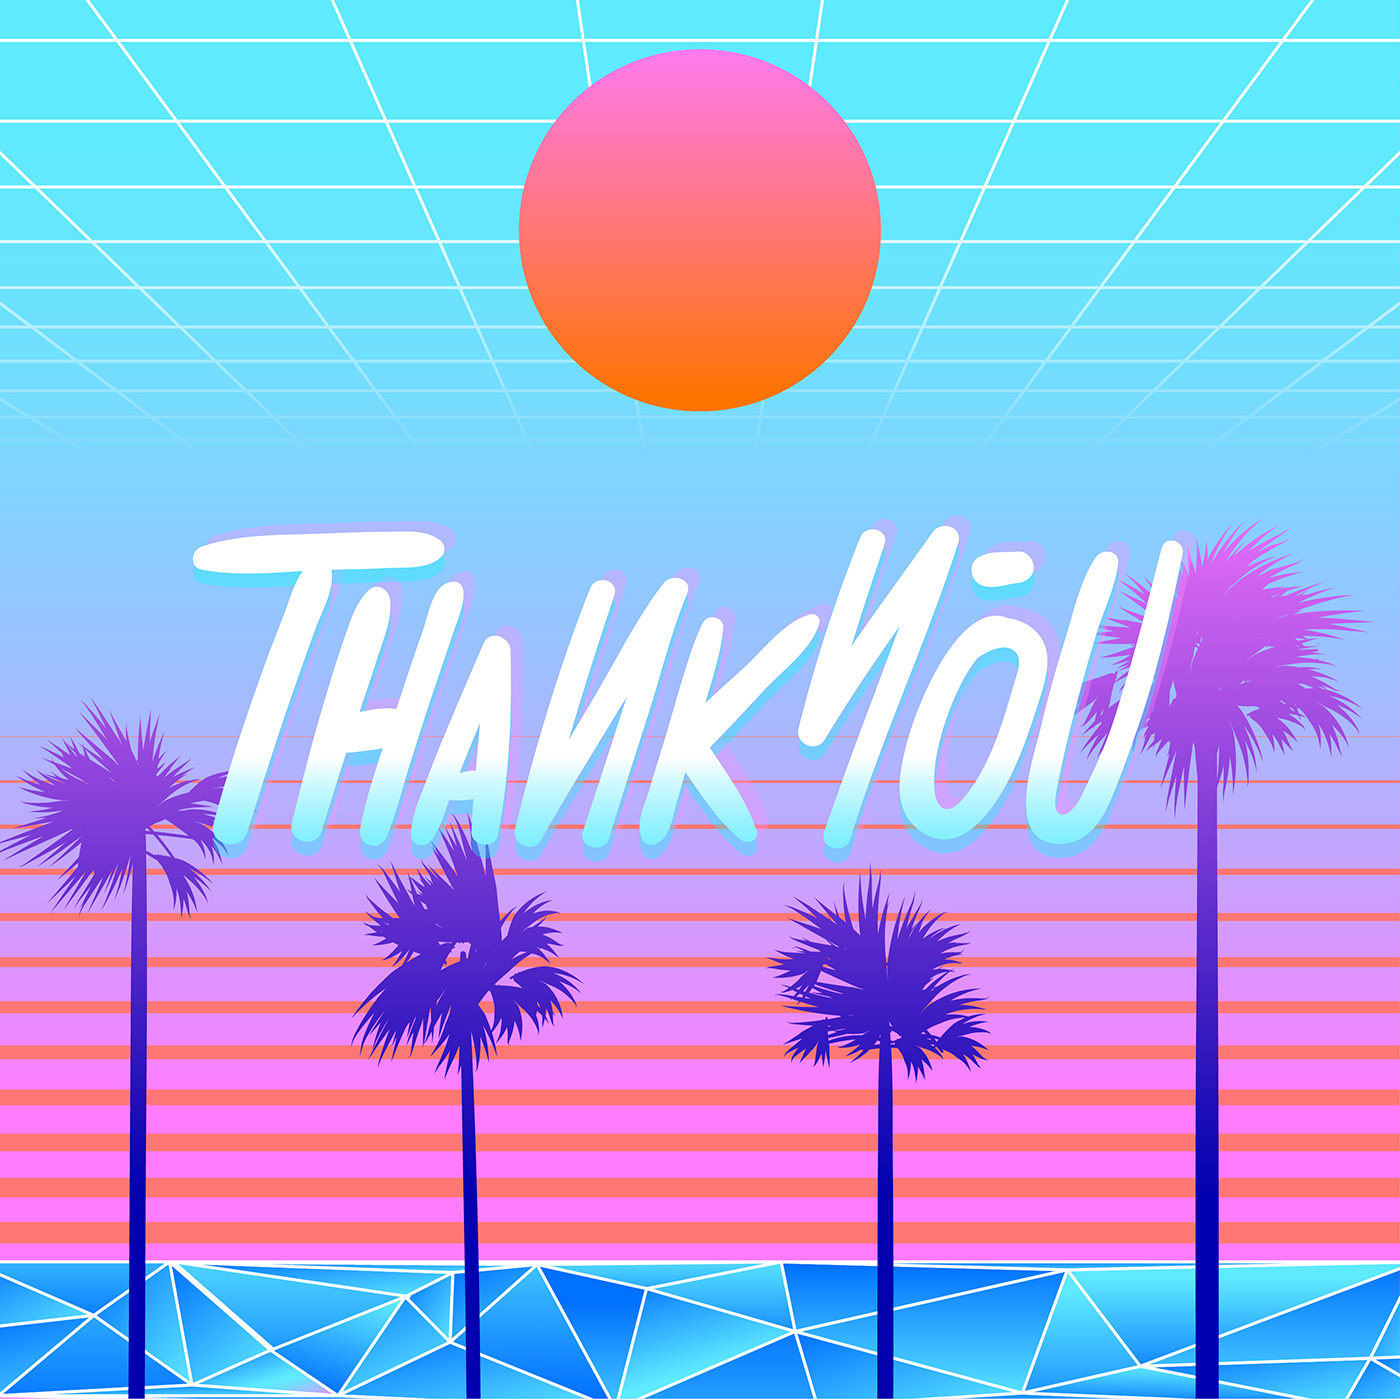 Thank You Typography Beach Vaporwave Vector - Download ...